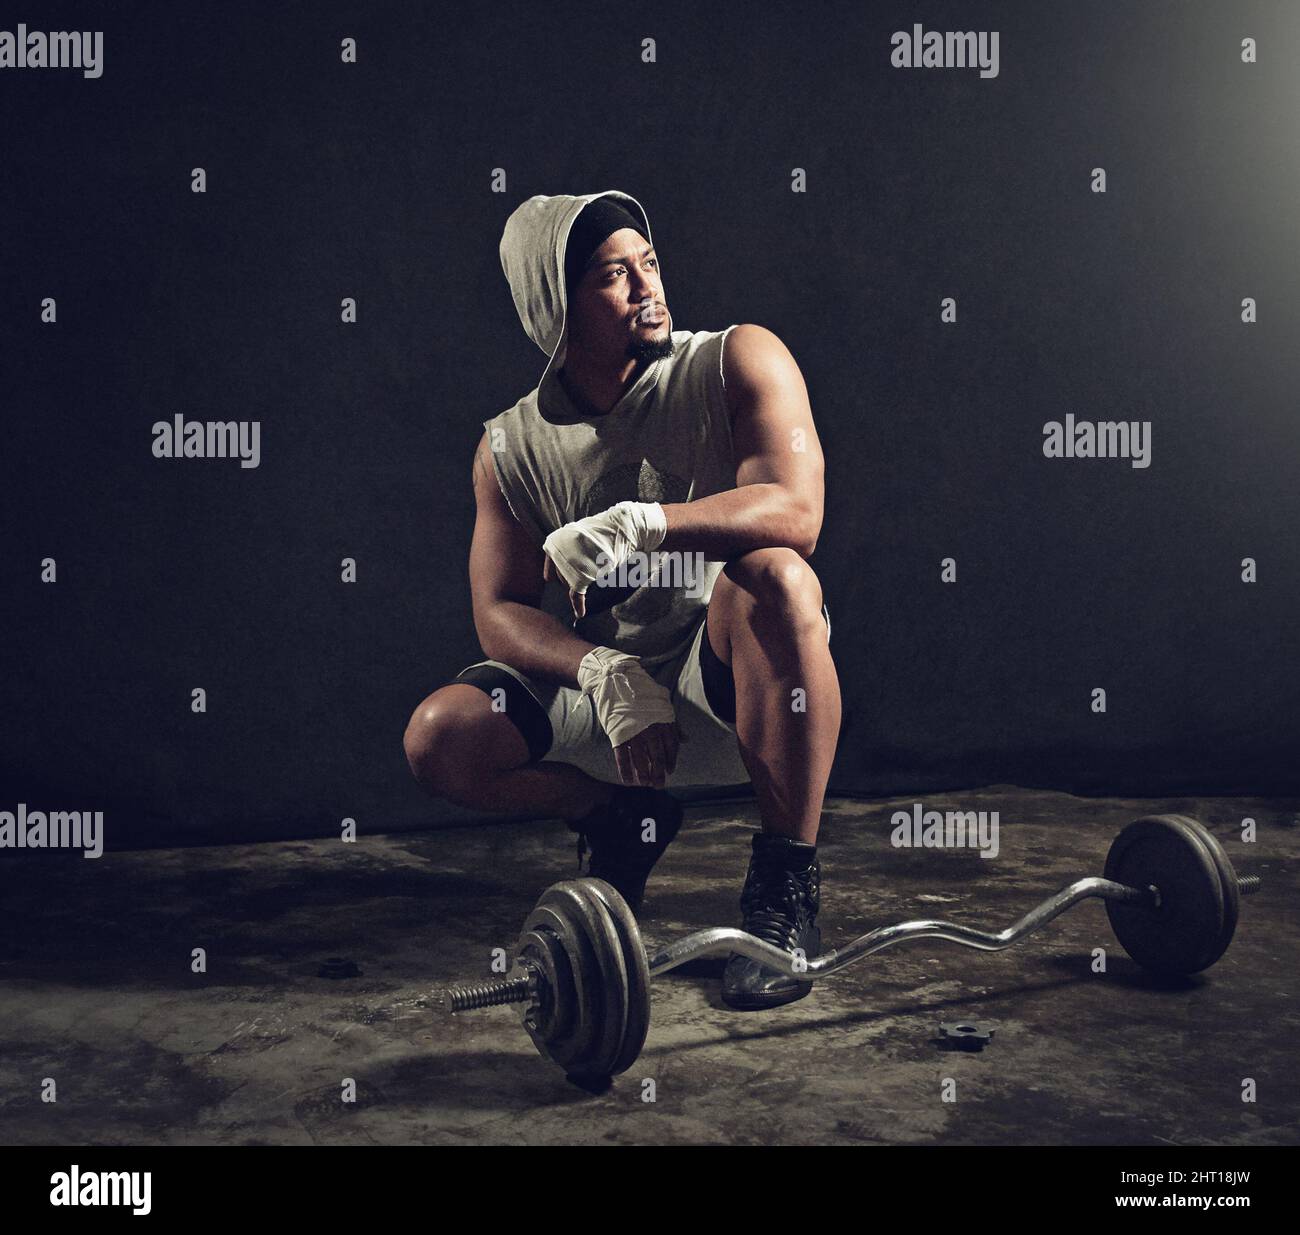 What a workout. Full length shot of an athletic young man crouching down besides weights against a dark background. Stock Photo